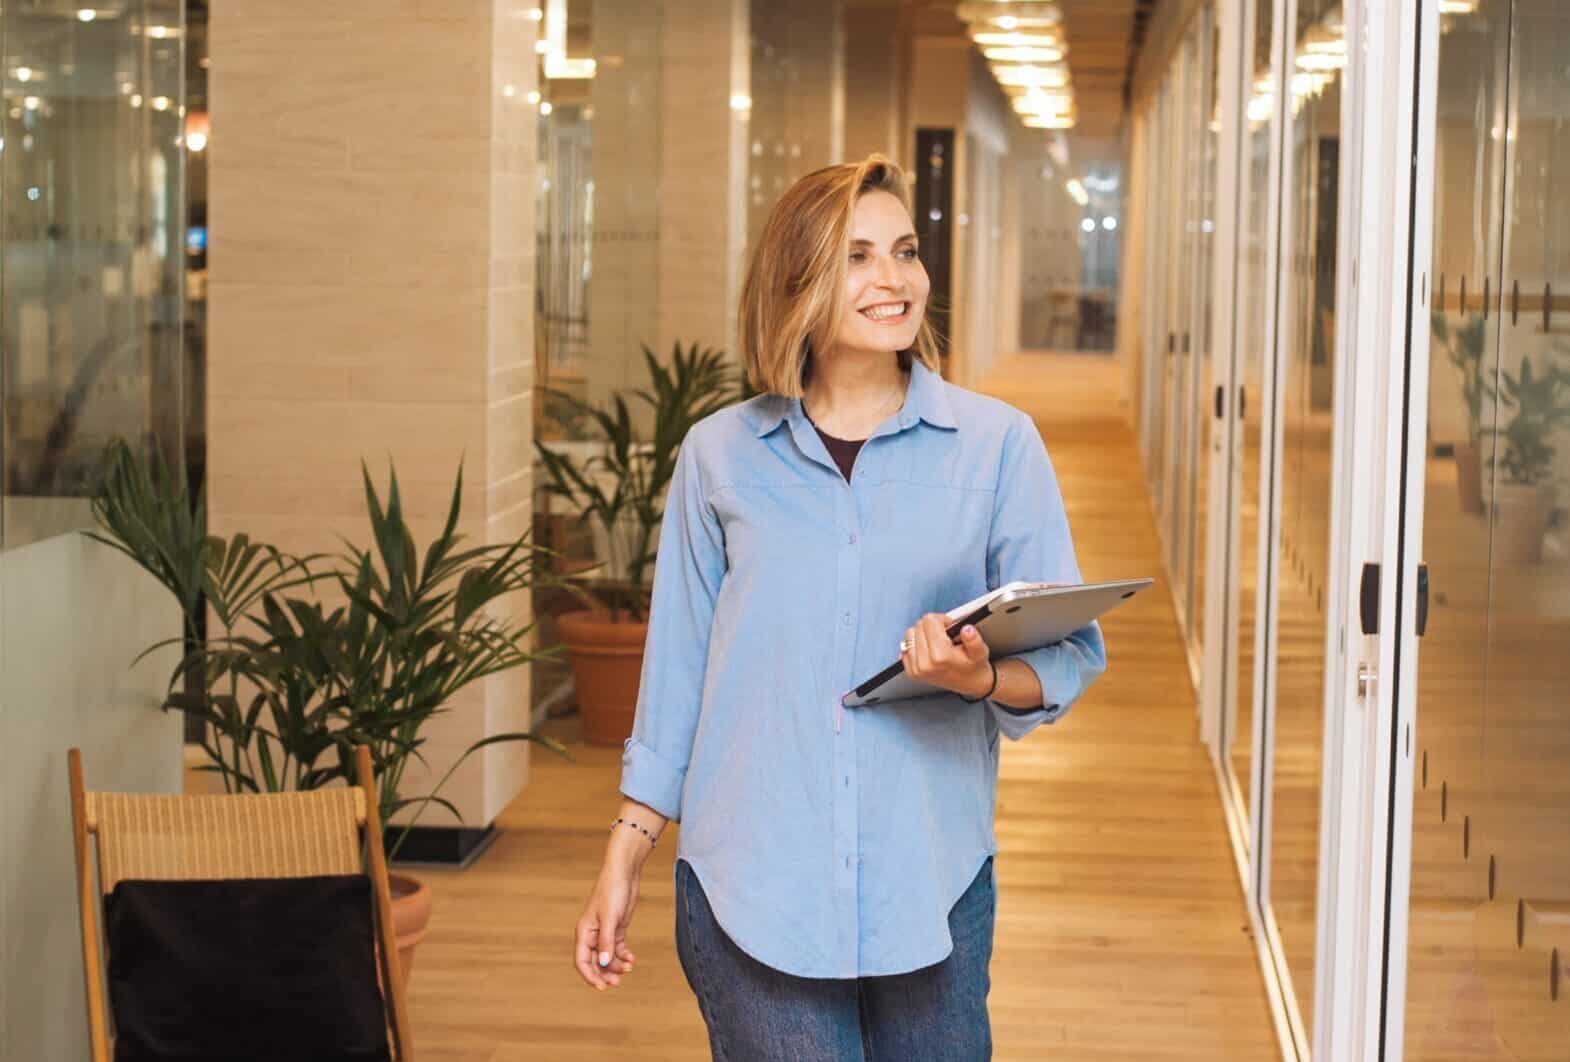 Image of a woman walking in hallway looking refreshed after a break.